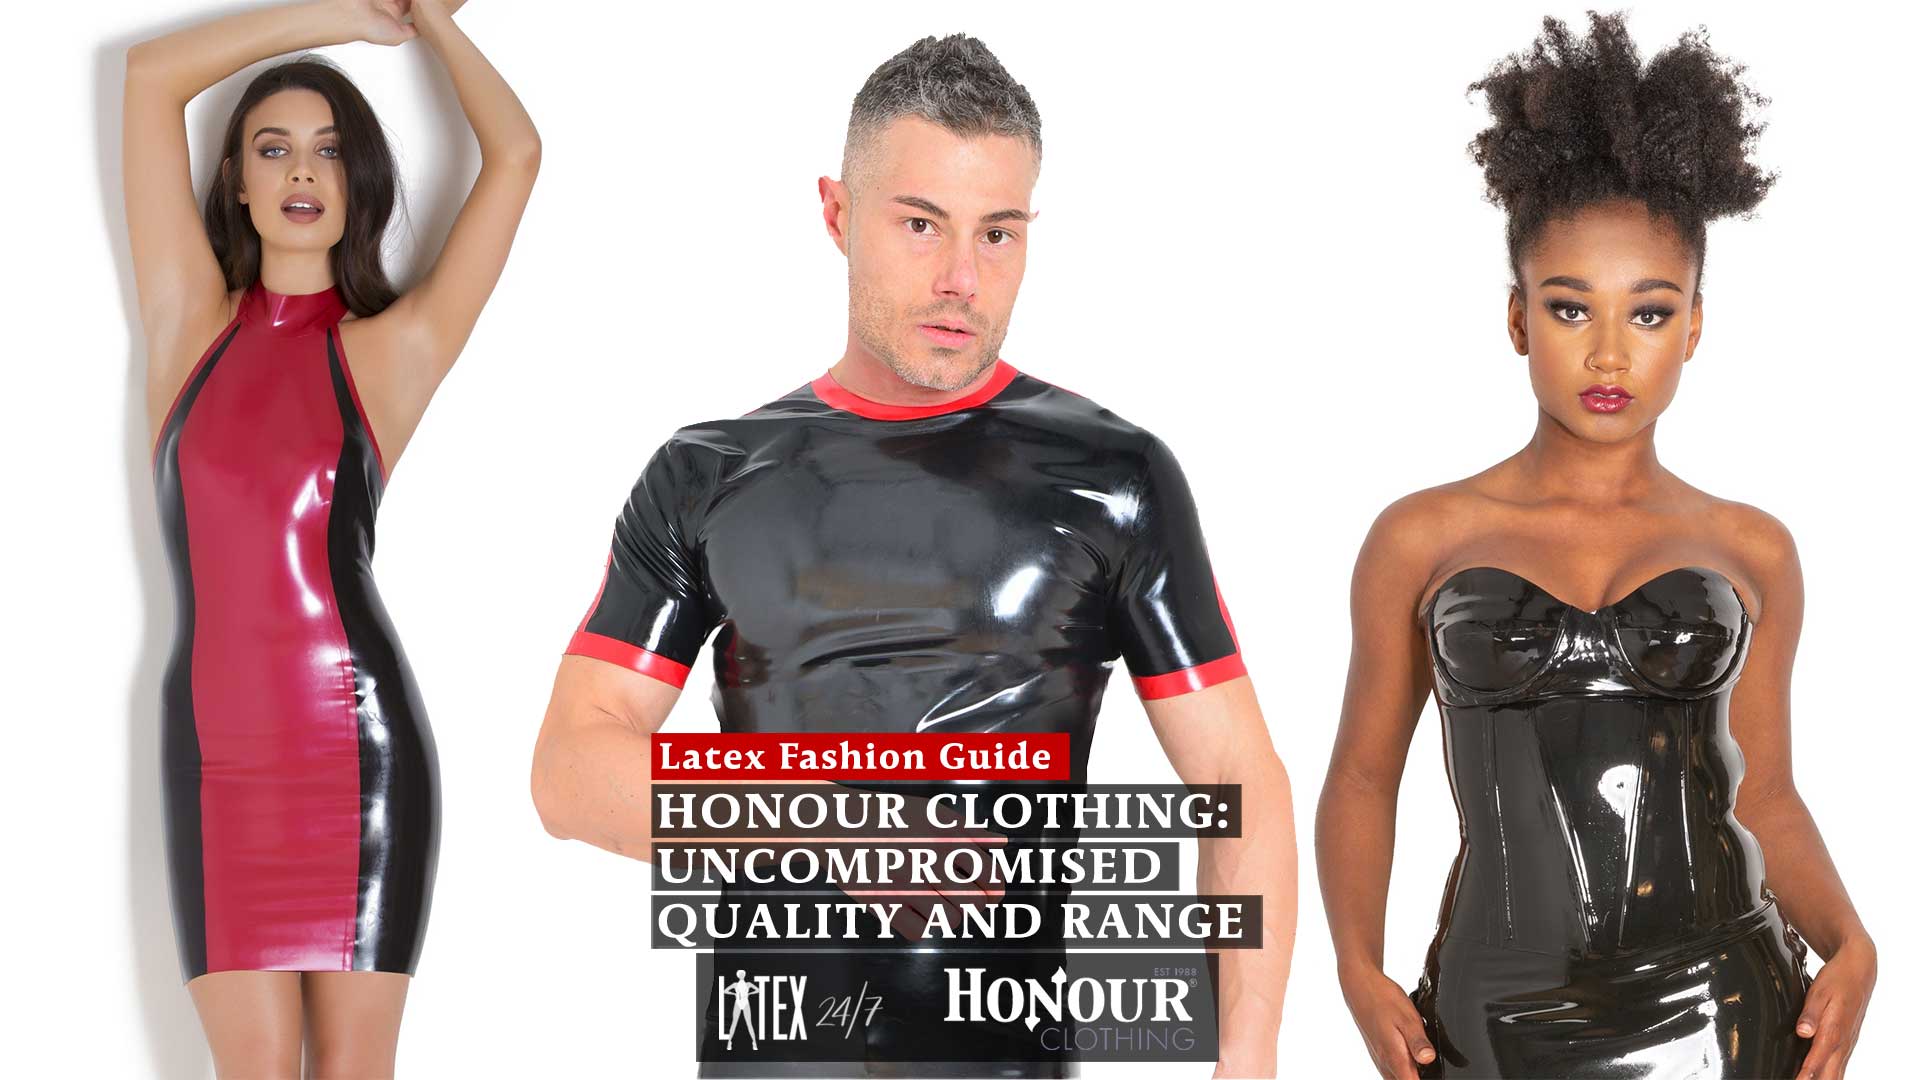 Honour Clothing - Uncompromised Quality and Range EXCLUSIVE - Latex24/7